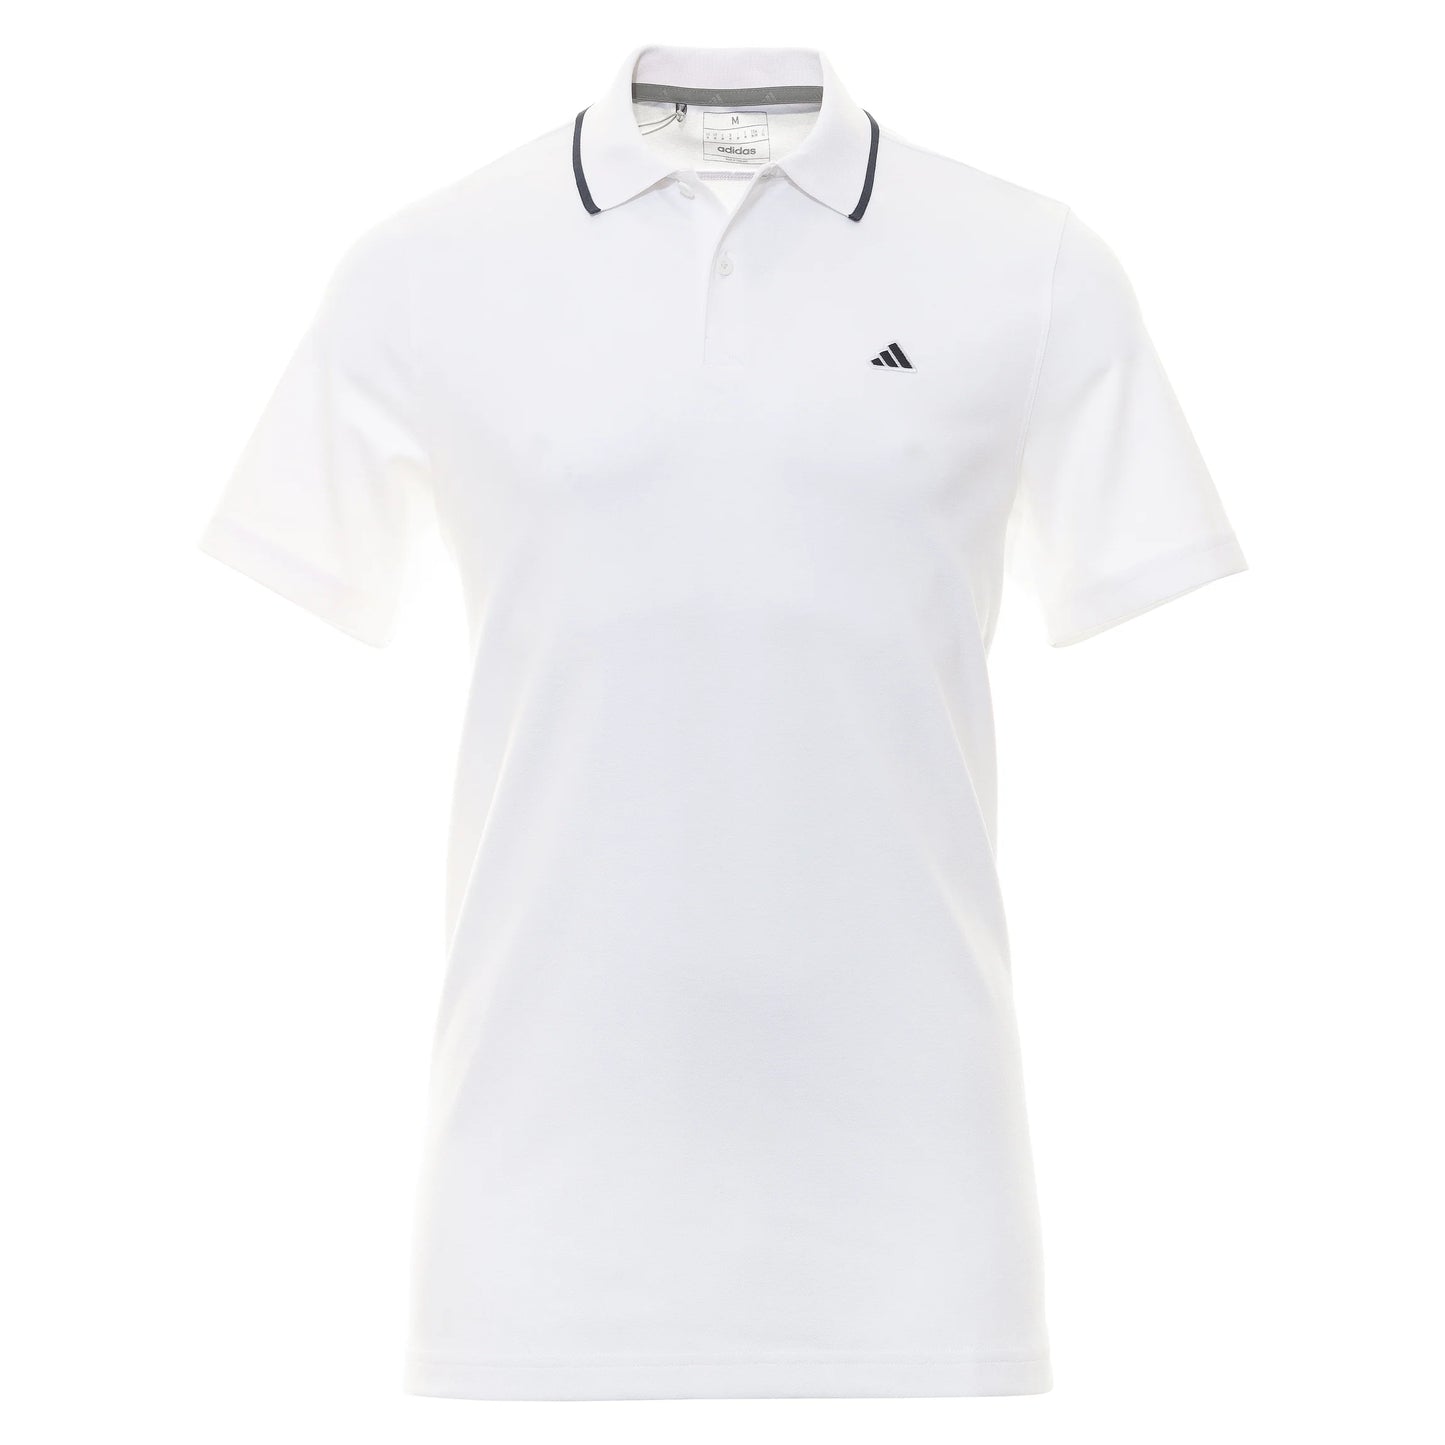 Adidas-H-Polo from Golf in Go-To Pique